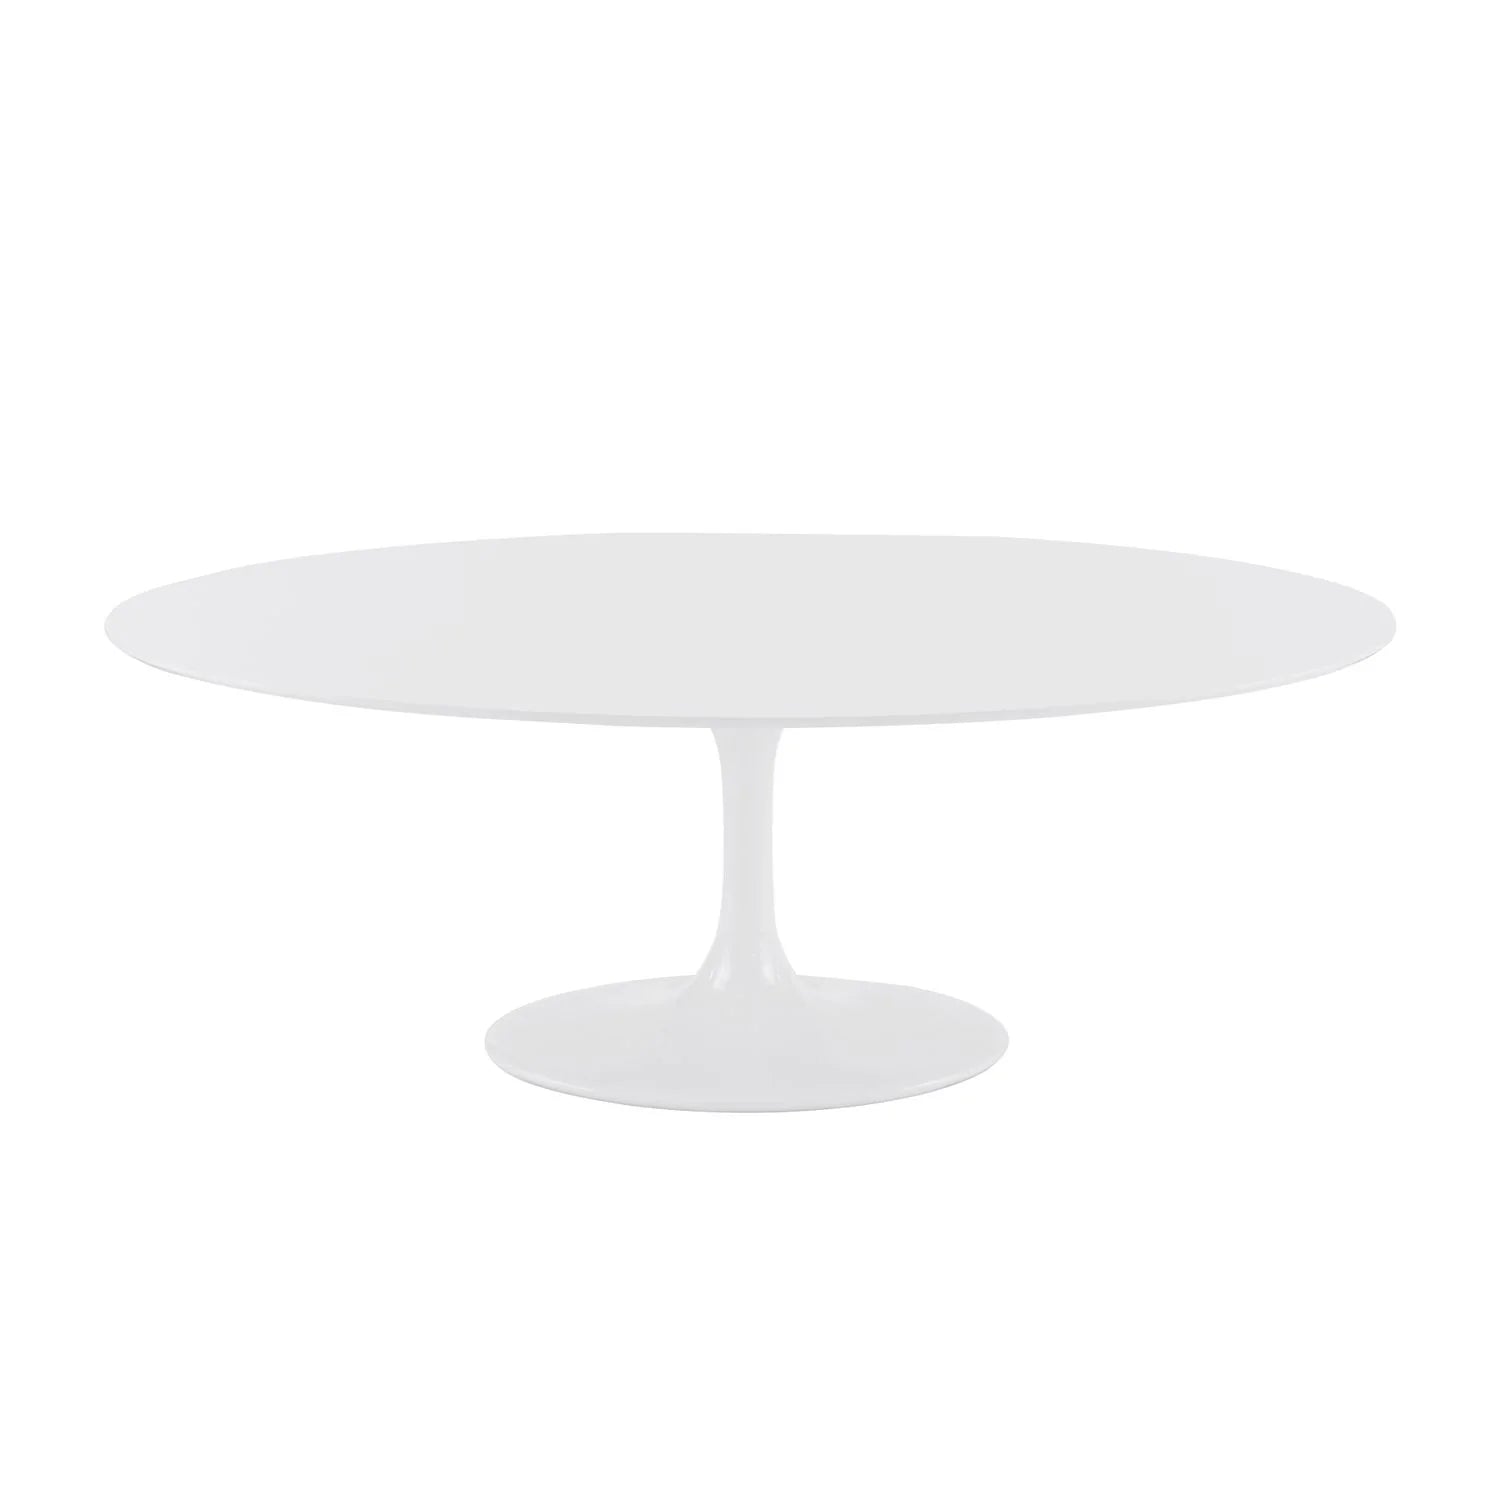 Astrid 79" Oval Dining Table in White - Modern - What A Room